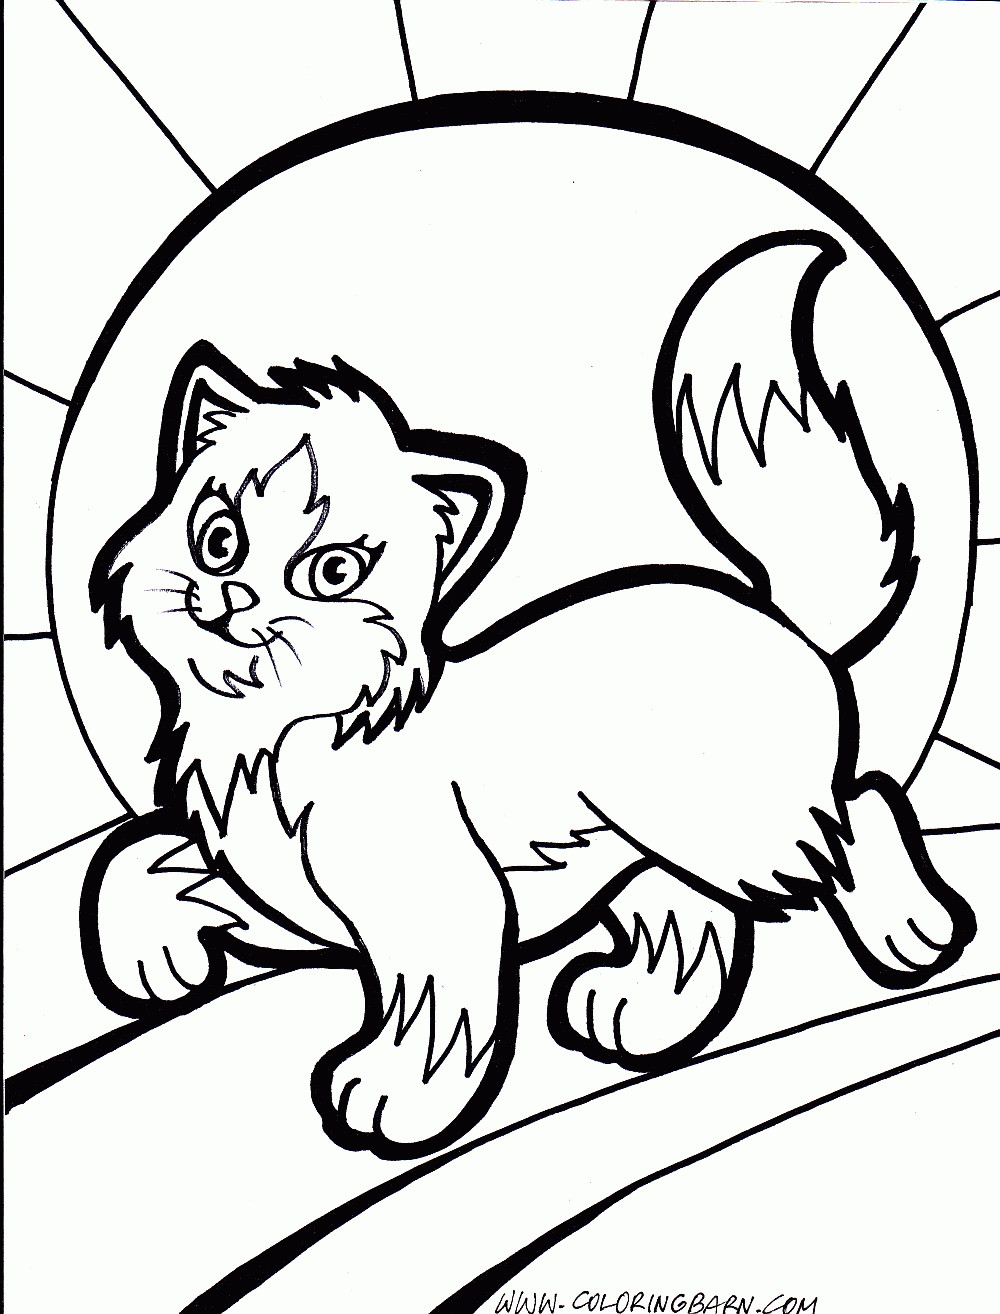 Cat Coloring Pages For Kids
 Coloring Pages for Kids Cat Coloring Pages for Kids